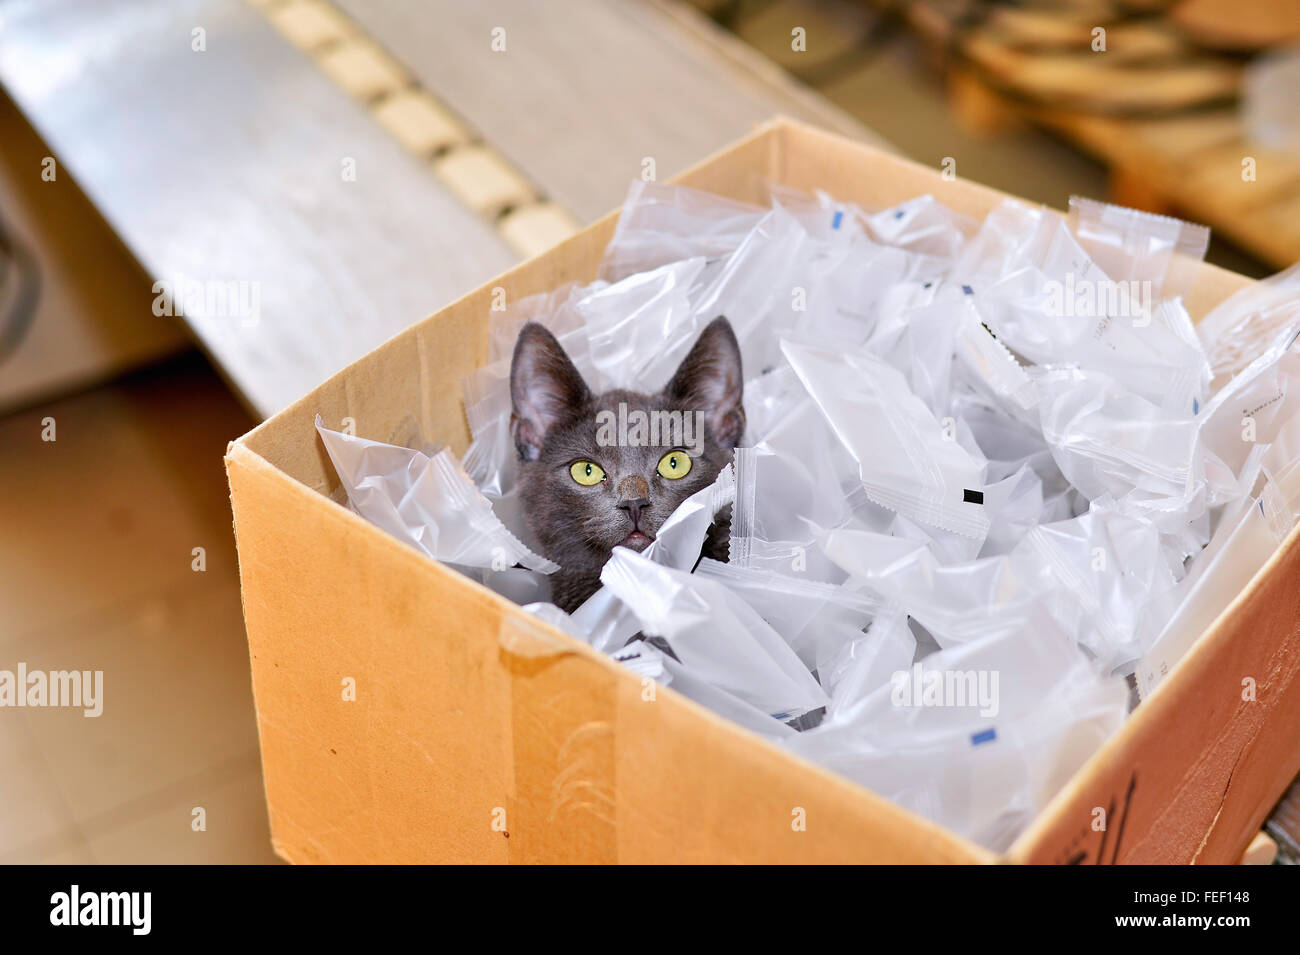 Homeless cat sitting in a cardboard box including plastic packaging in stock. Stock Photo